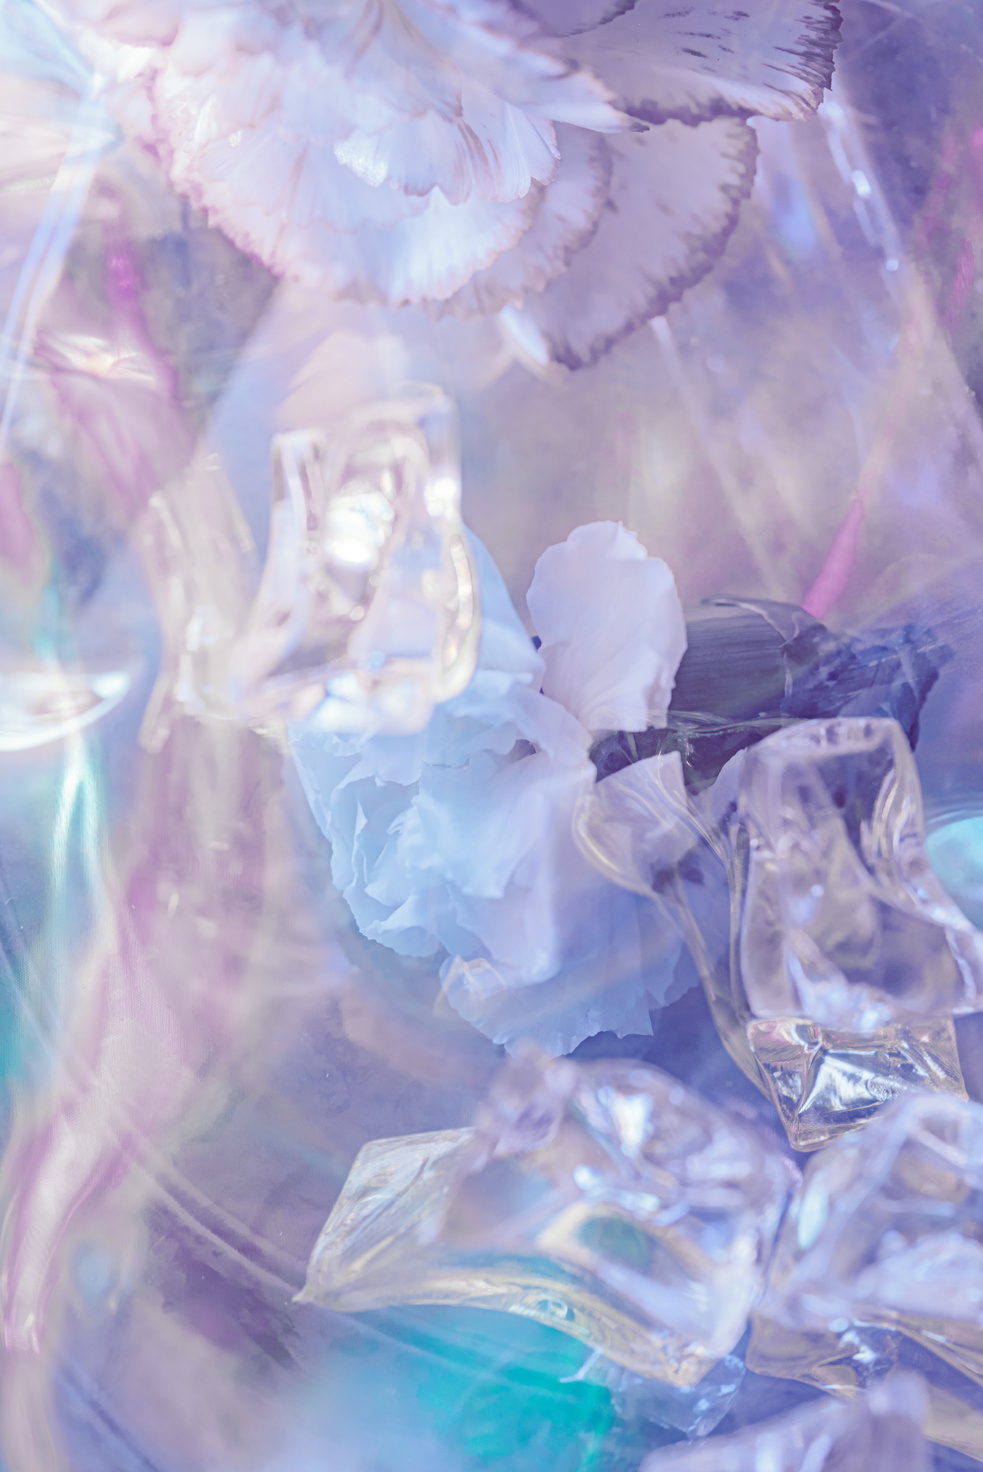 Abstract Lavender Crystal